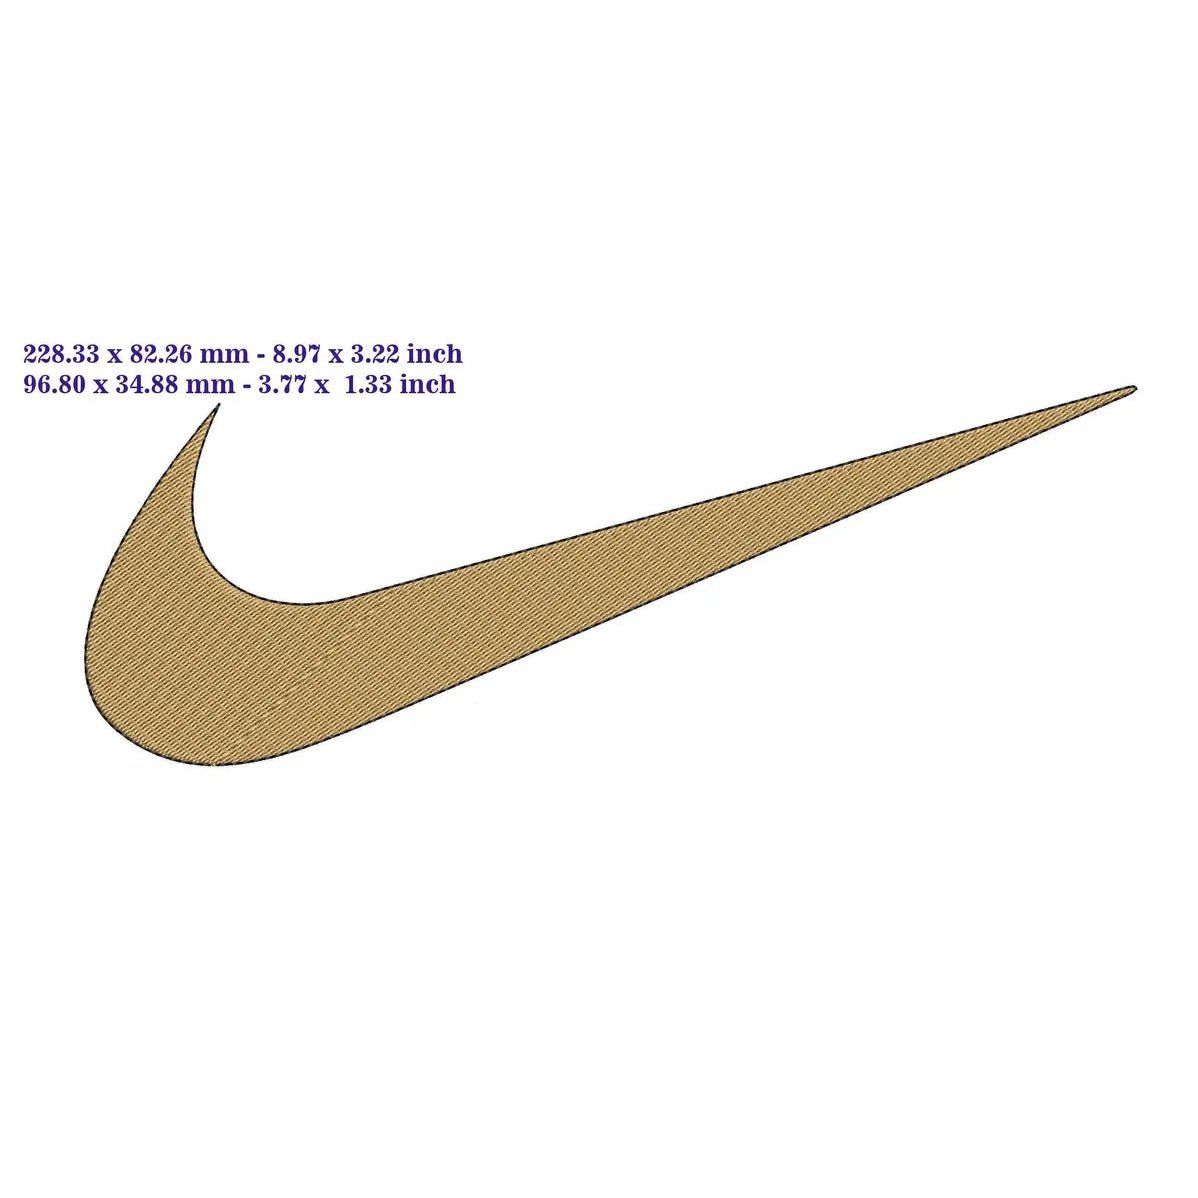 Nike gold logo - Embroidery Design - FineryEmbroidery